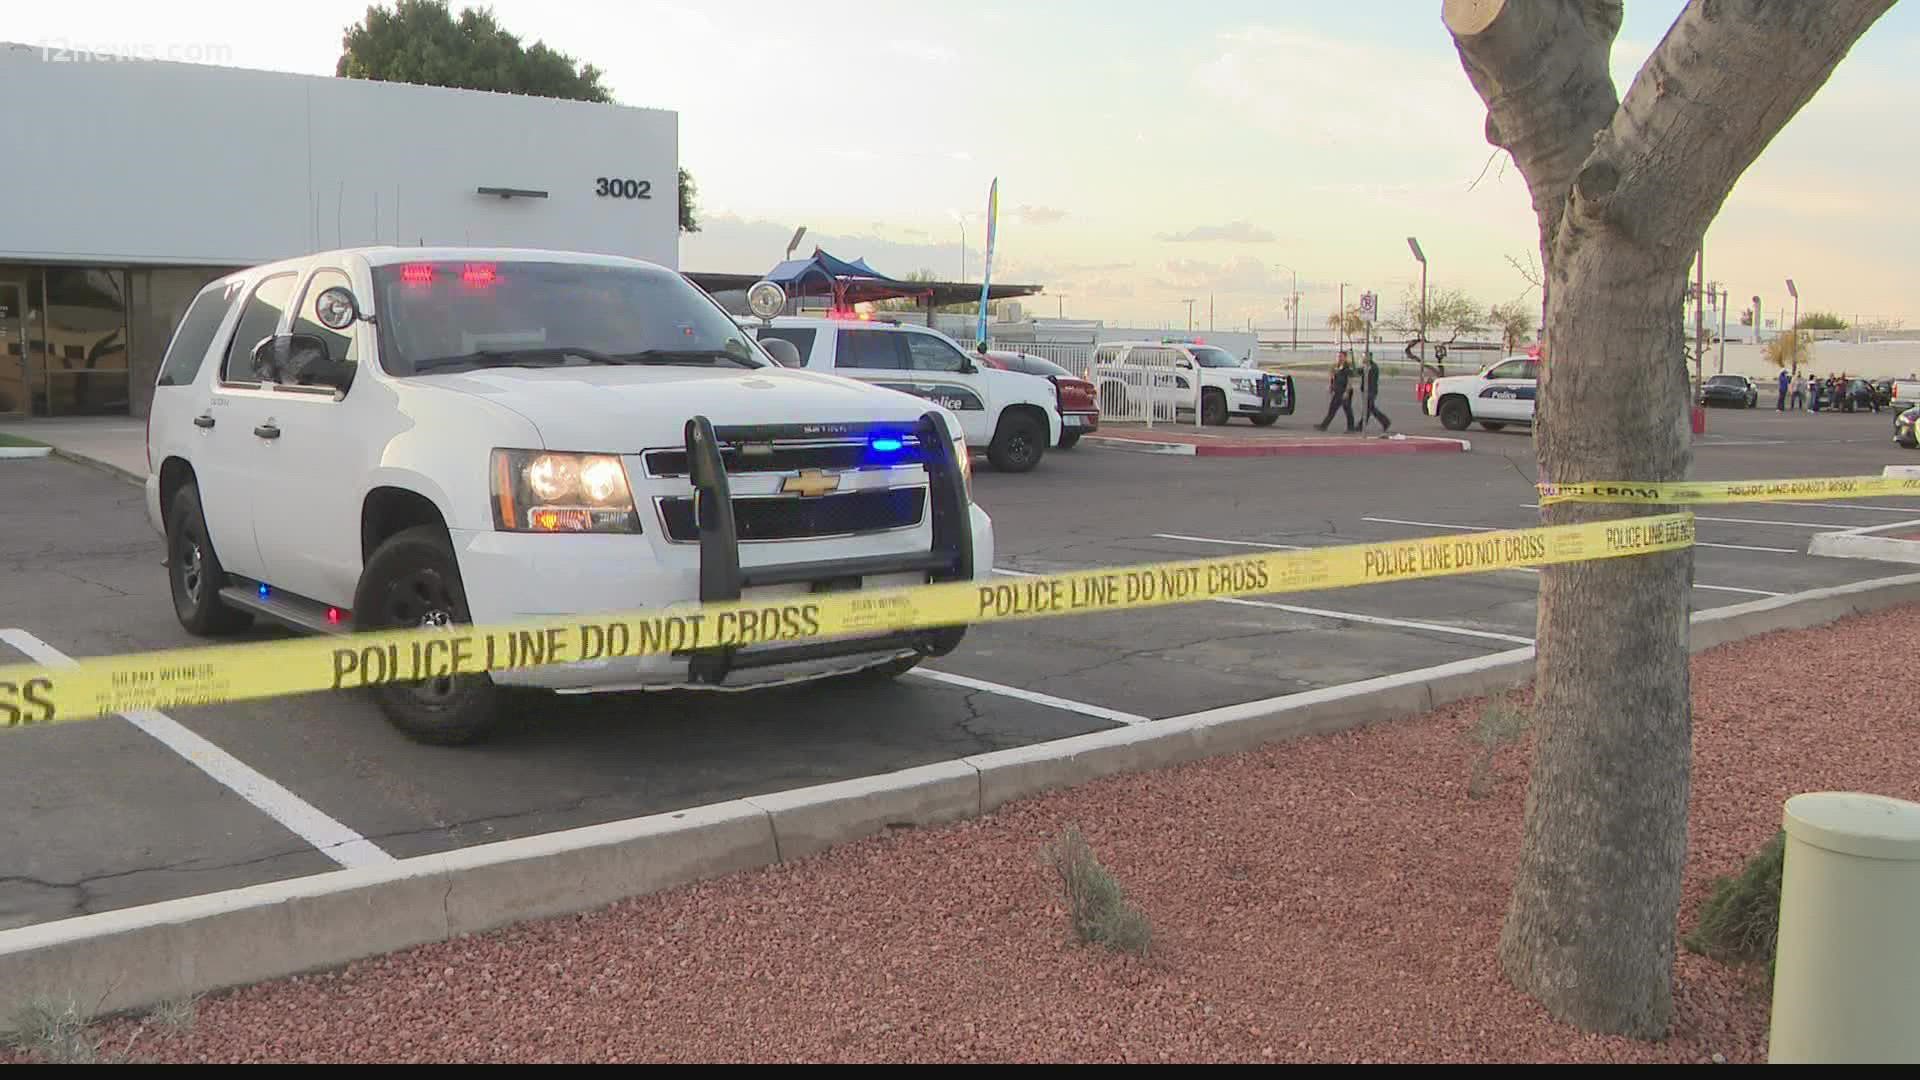 Two teenagers were hospitalized after they were shot on Sunday, according to the Phoenix Police Department.